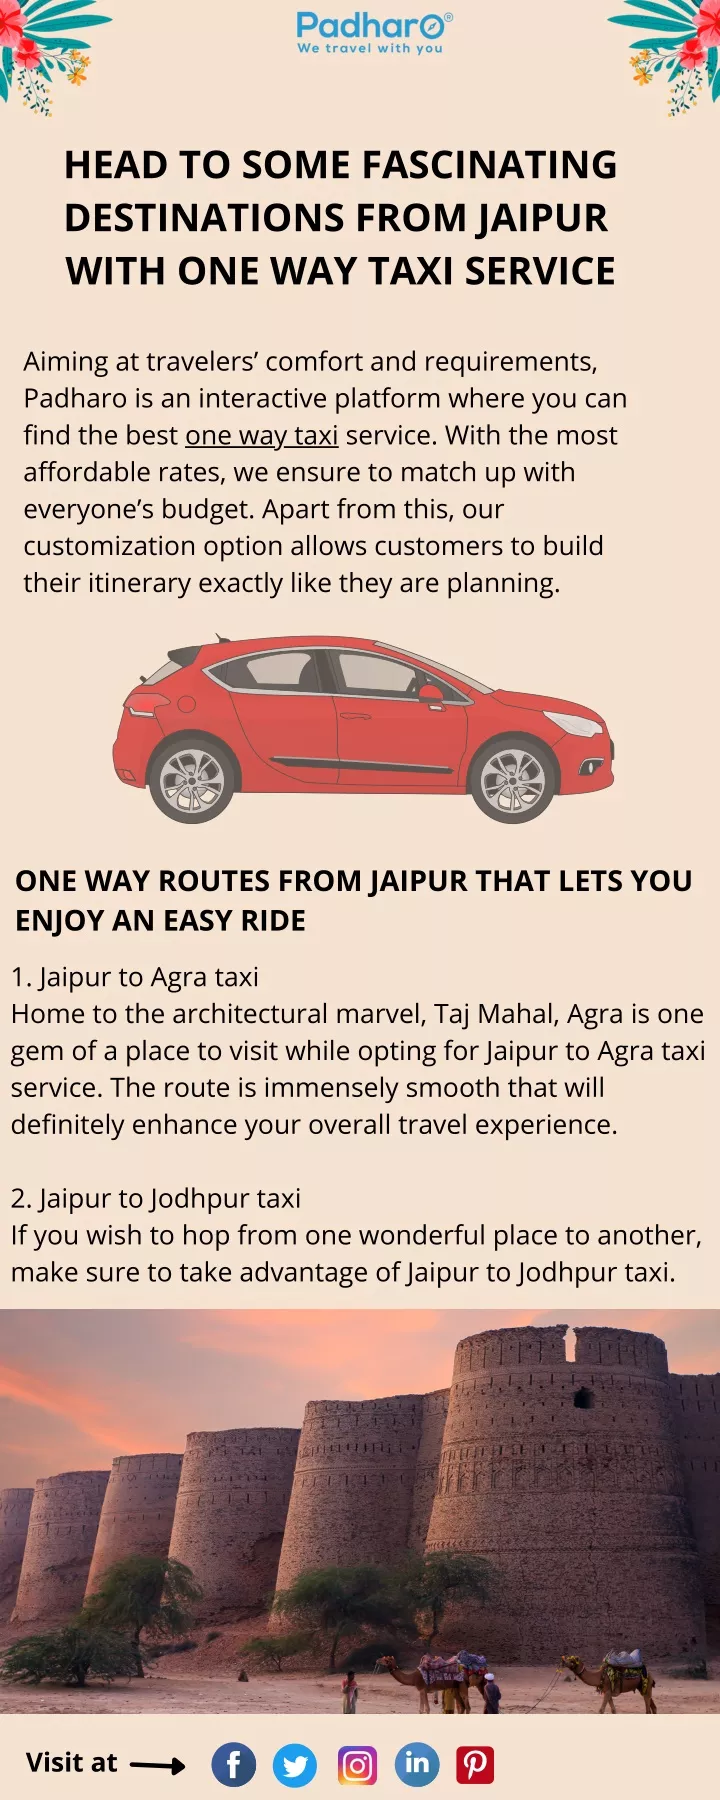 head to some fascinating destinations from jaipur